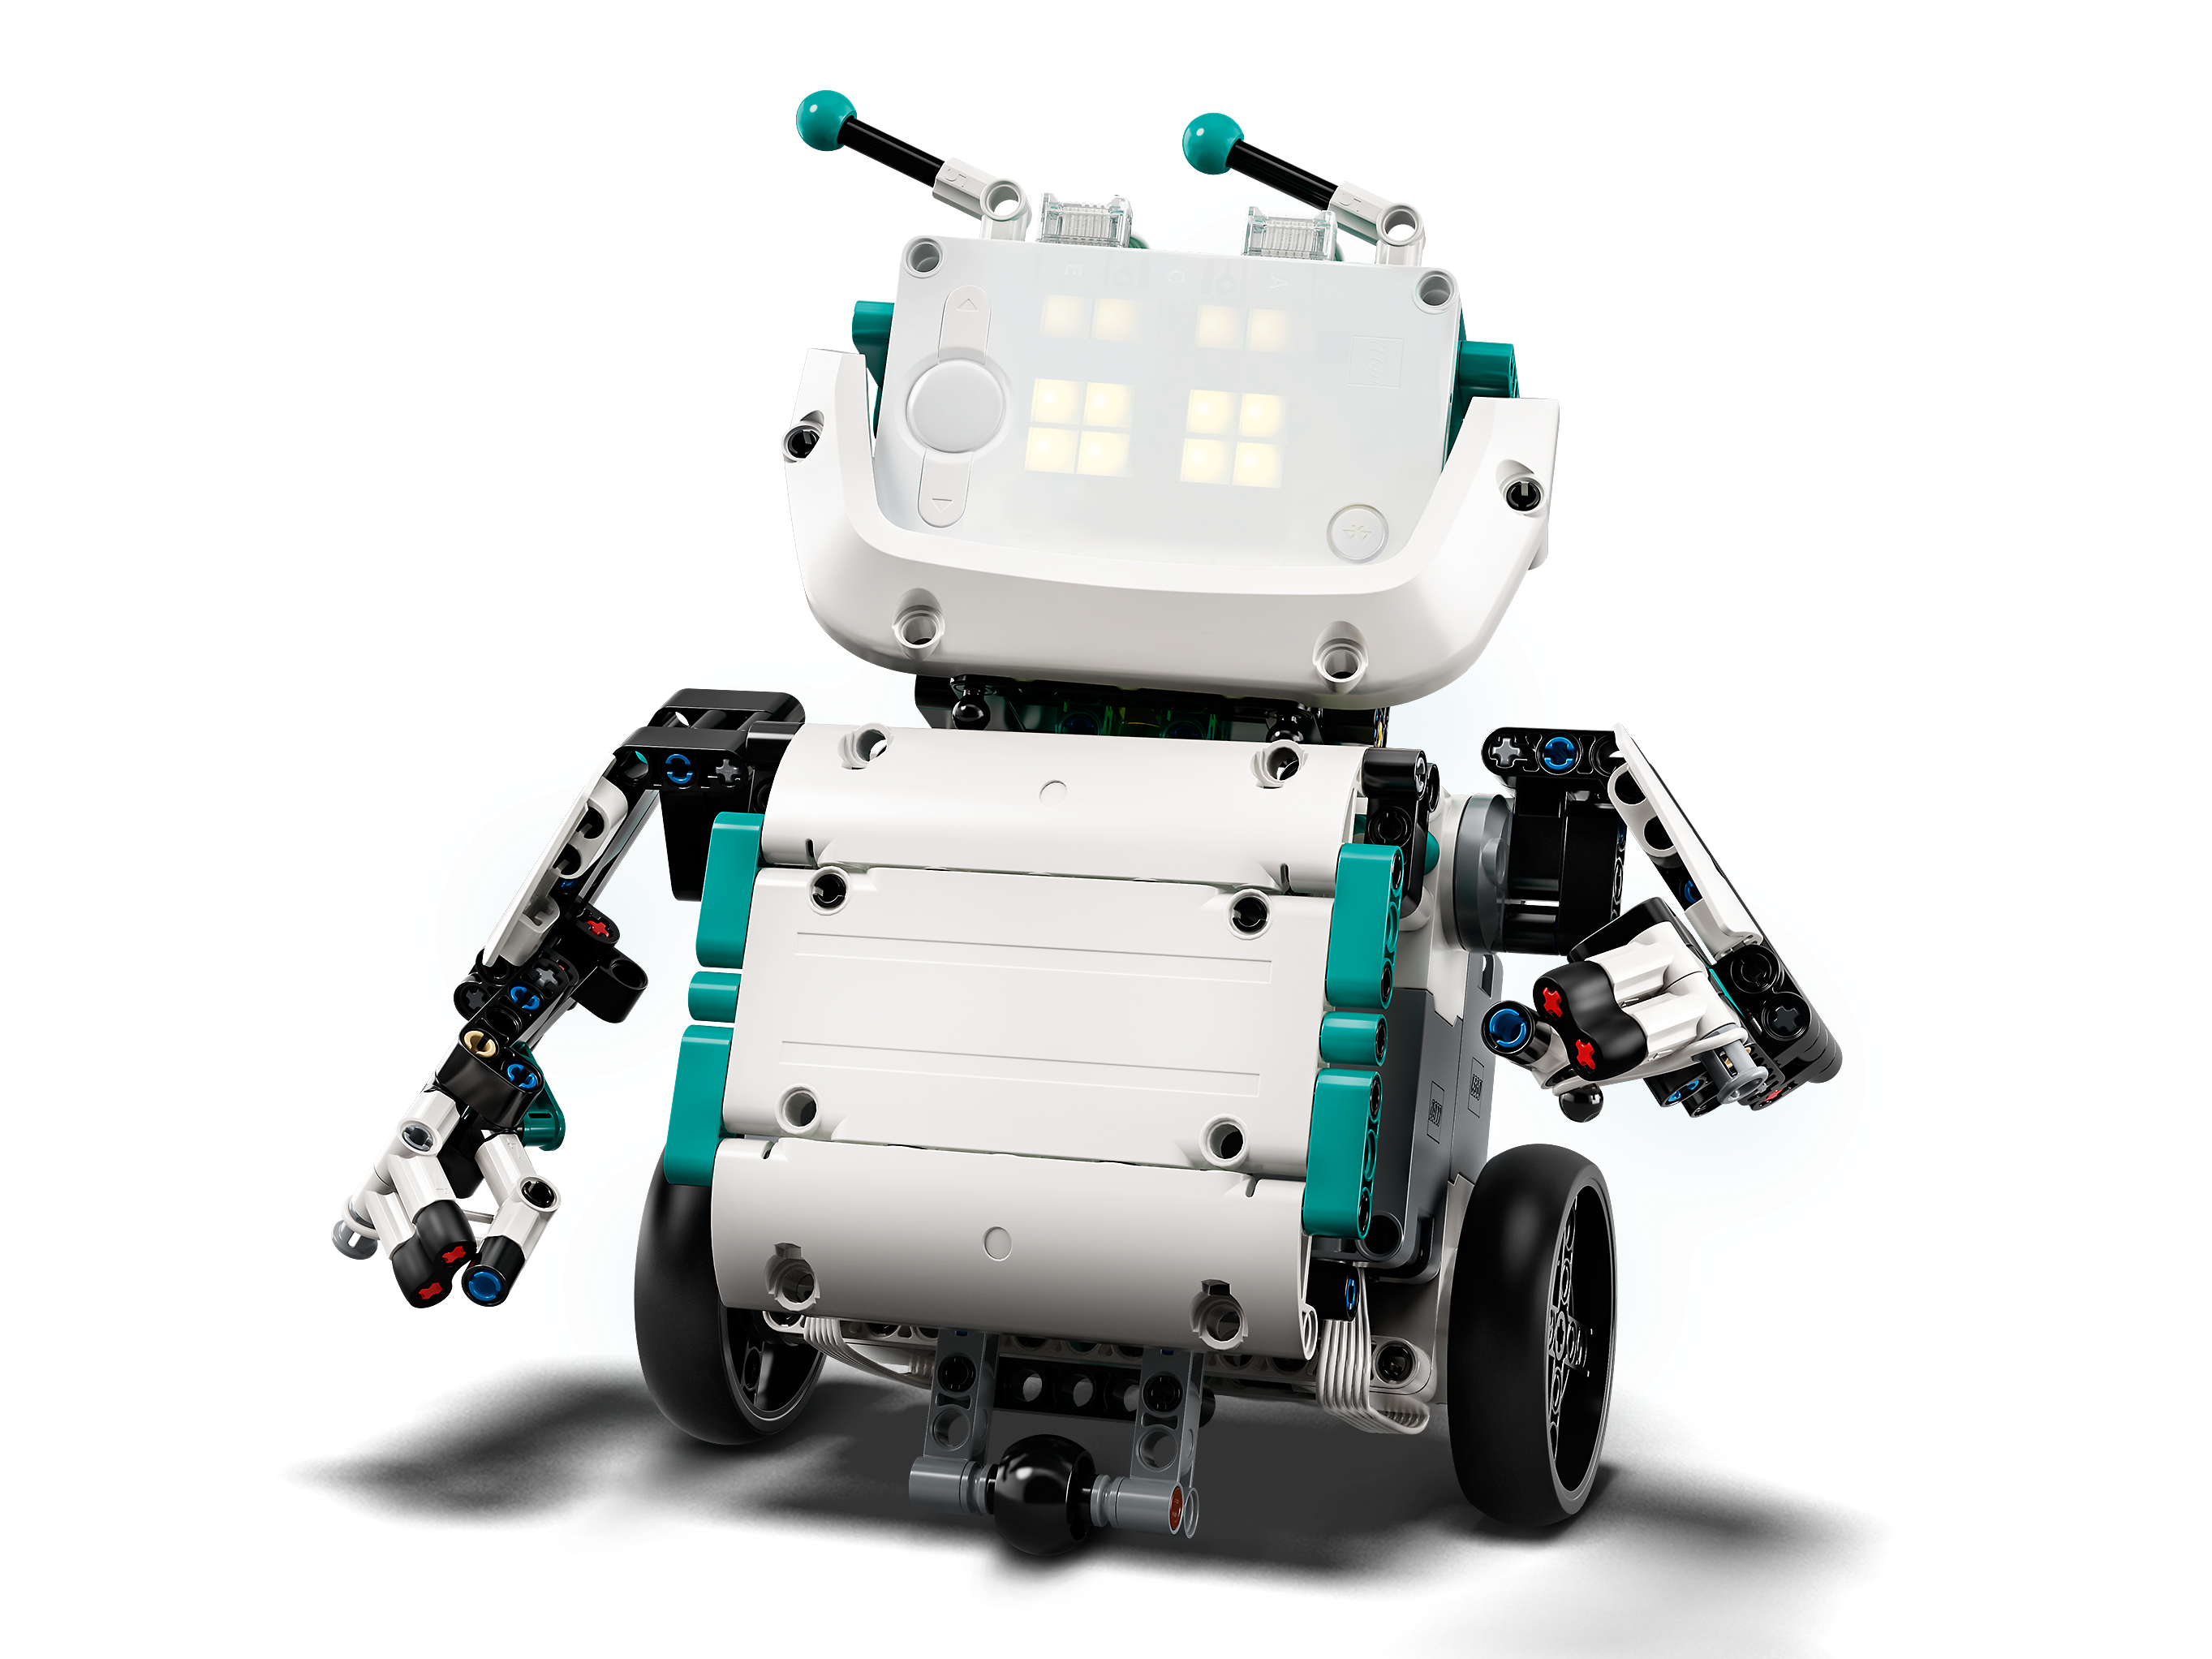 LEGO MINDSTORMS Robot Inventor Building Set; STEM Kit for Kids and Tech Toy  with Remote Control Robots; Inspiring Code and Control Edutainment Fun